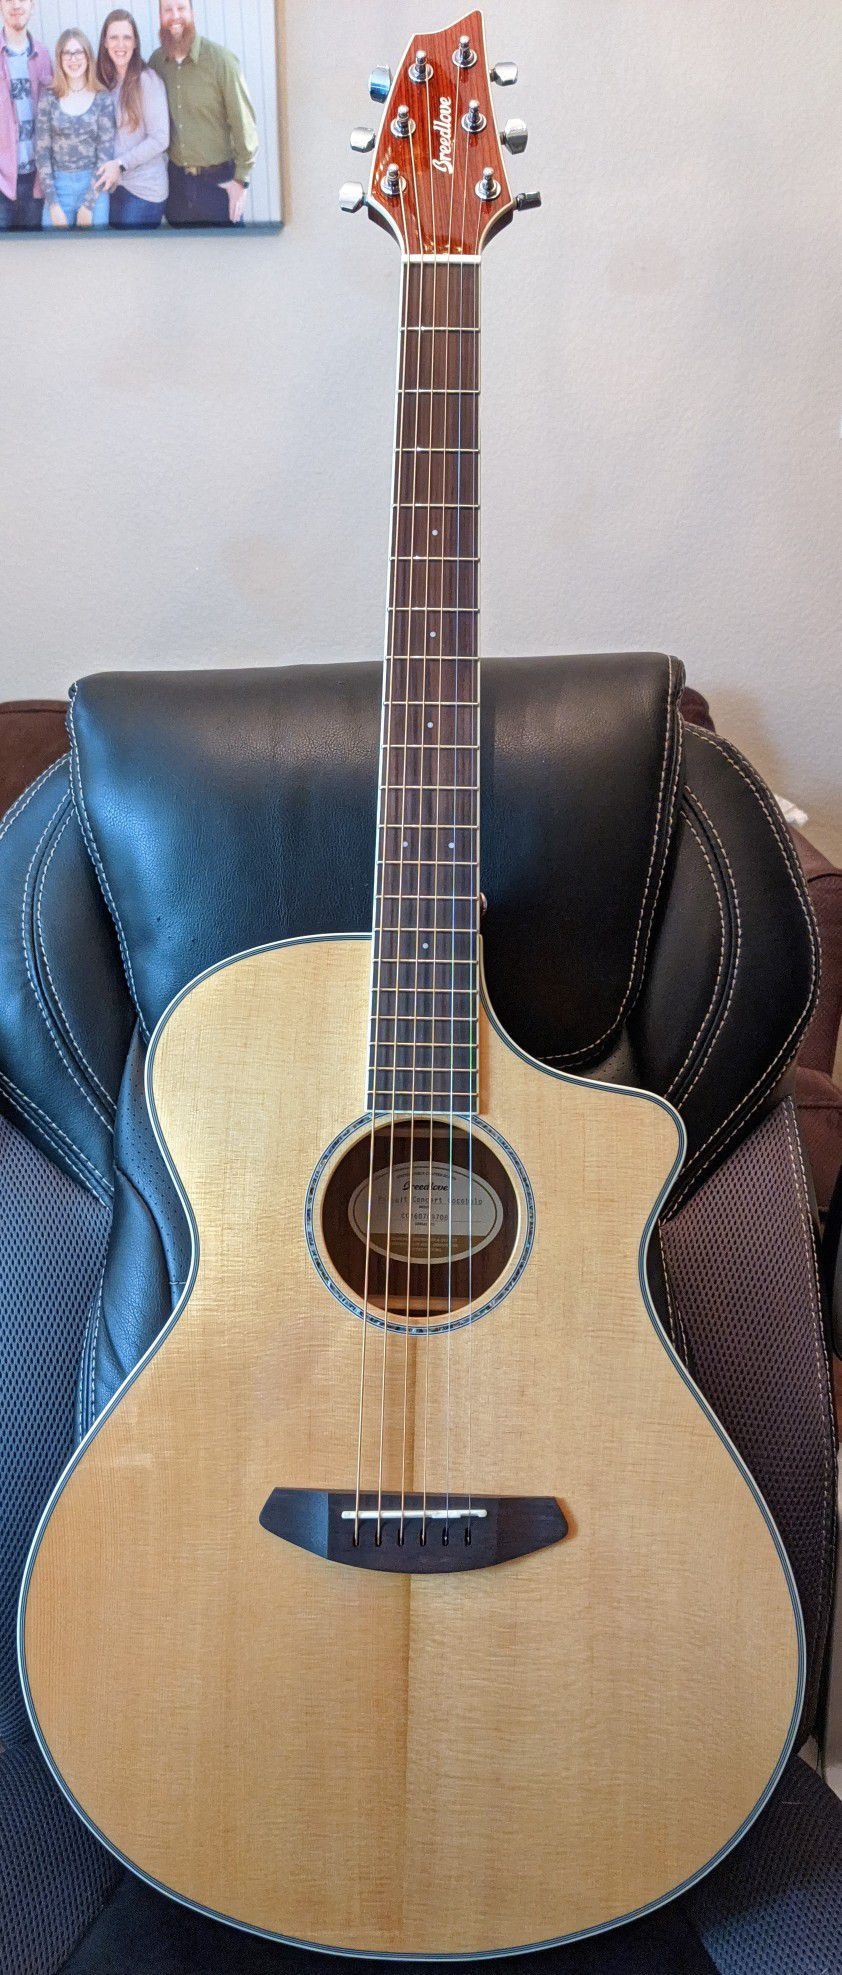 NEVER PLAYED - MINT- Breedlove Pursuit Ex Concert Cocobolo CE Acoustic-Electric Guitar. With Soft bag - $600 firm